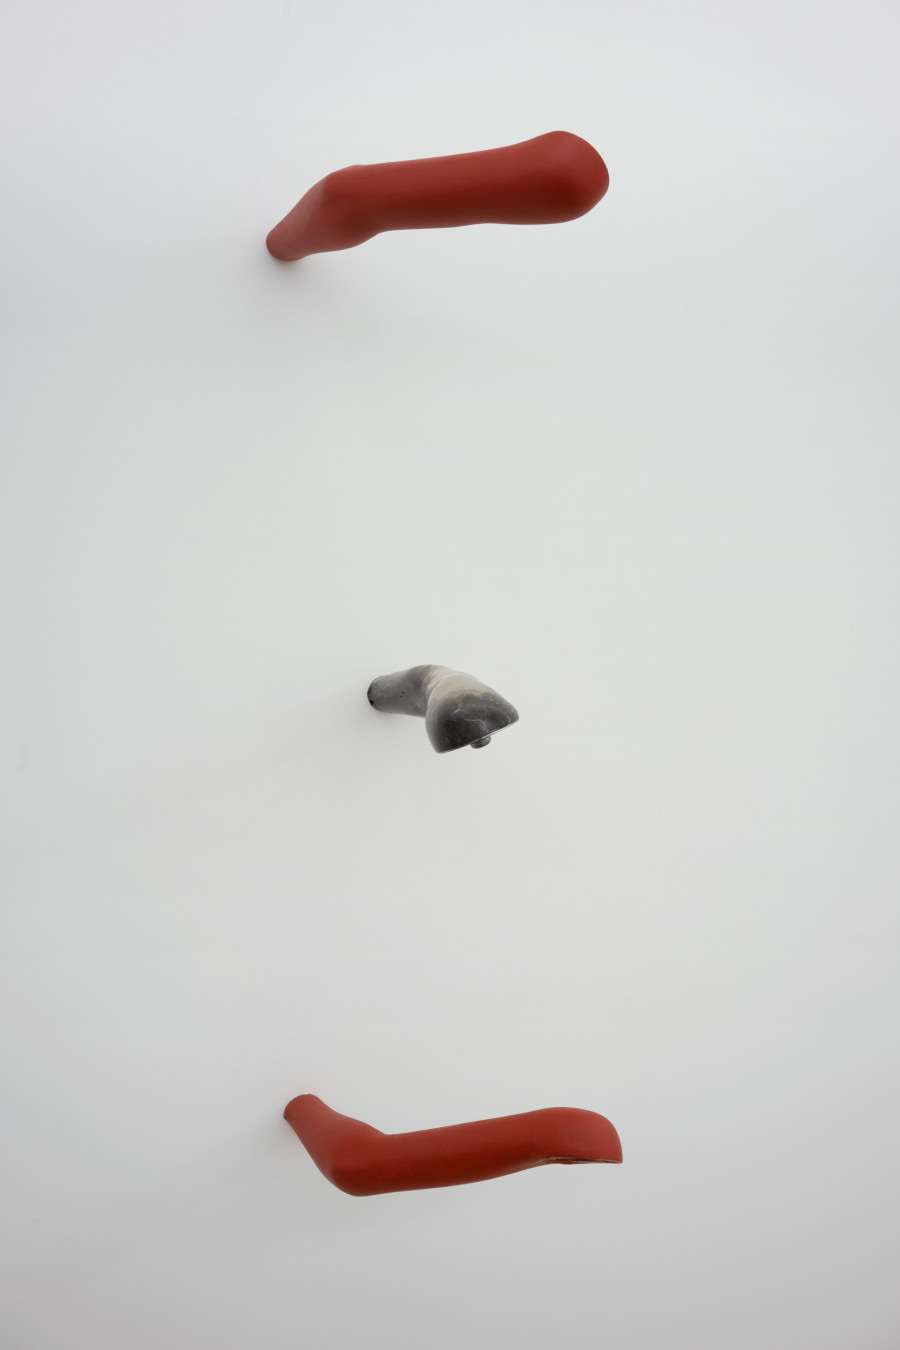 Thomas Julier, Elbow Segments, 2023, acrylic paint on fibre glass, sanded and polished fibre glass, 125 x 35 x 53 cm. Photography: Gina Folly / all images copyright and courtesy of the artist and For, Basel